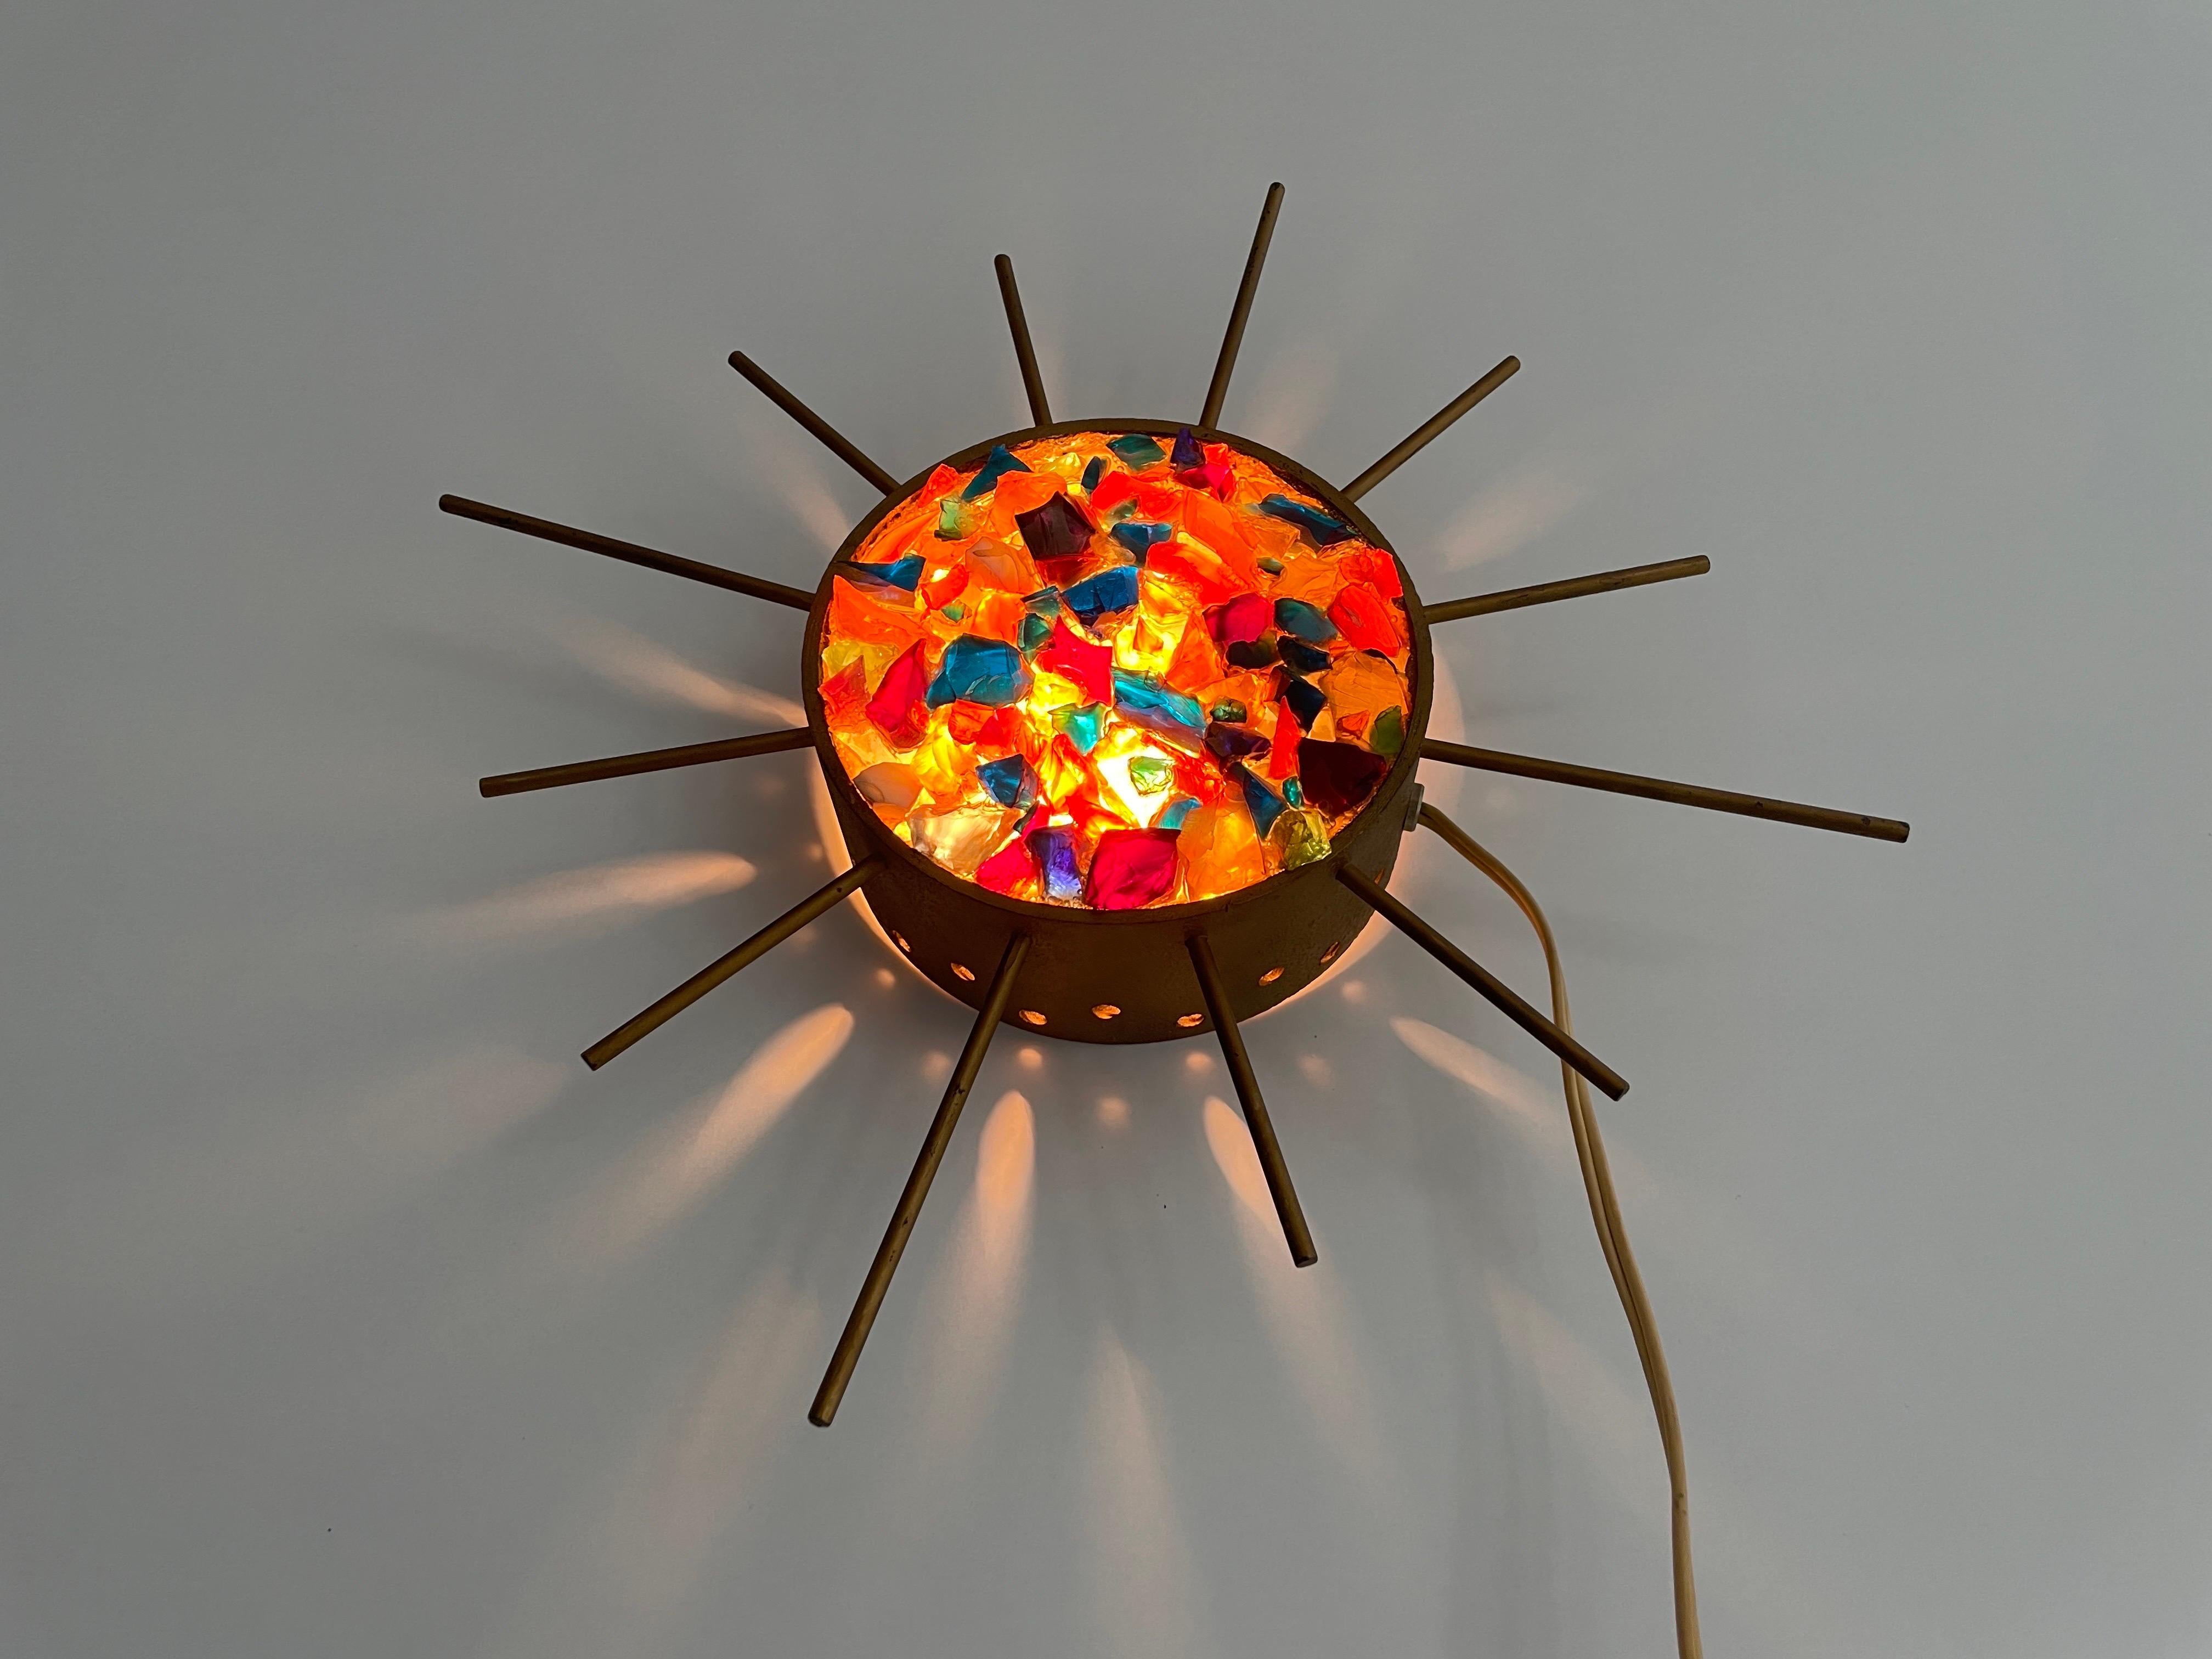 Sunburst Design Colorful Glass Pieces in Stone Form Wall Lamp, 1960s, Germany For Sale 4